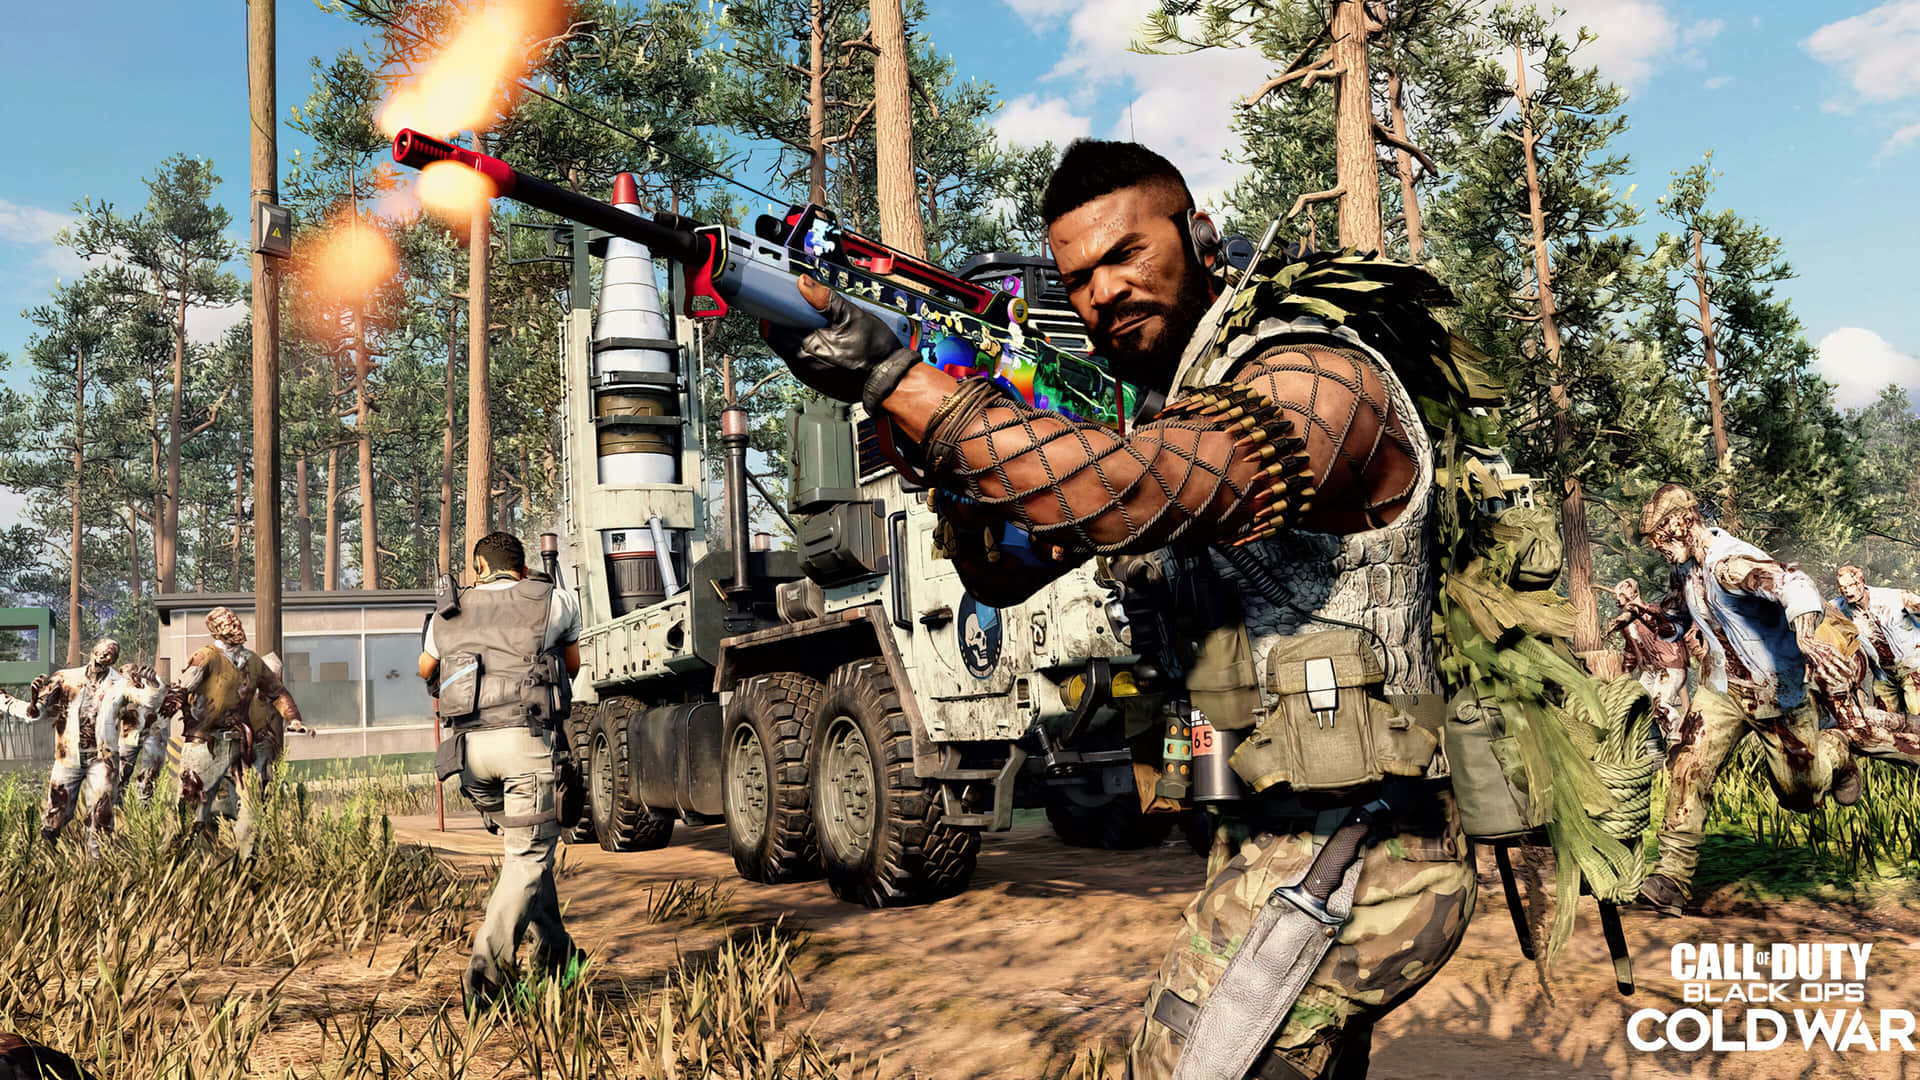 Join The Mission: Experience the Highly-Anticipated Call of Duty: Black Ops Cold War